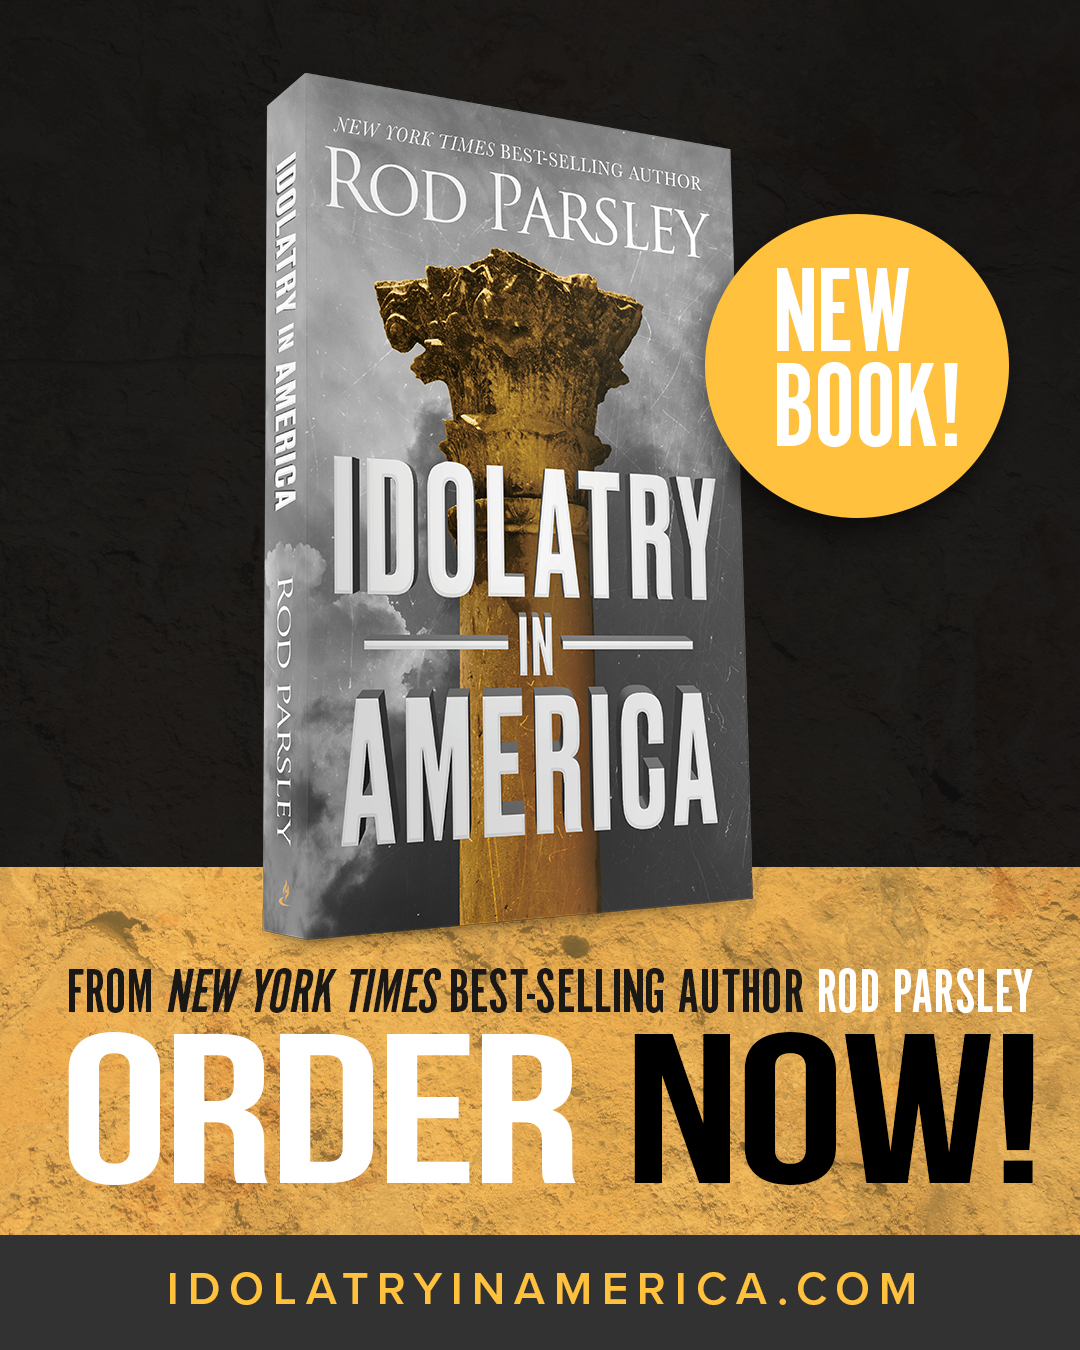 NEW BOOK! ORDER YOUR COPY TODAY! FROM NEW YORK TIMES BEST-SELLING AUTHOR ROD PARSLEY IDOLATRYINAMERICA.COM